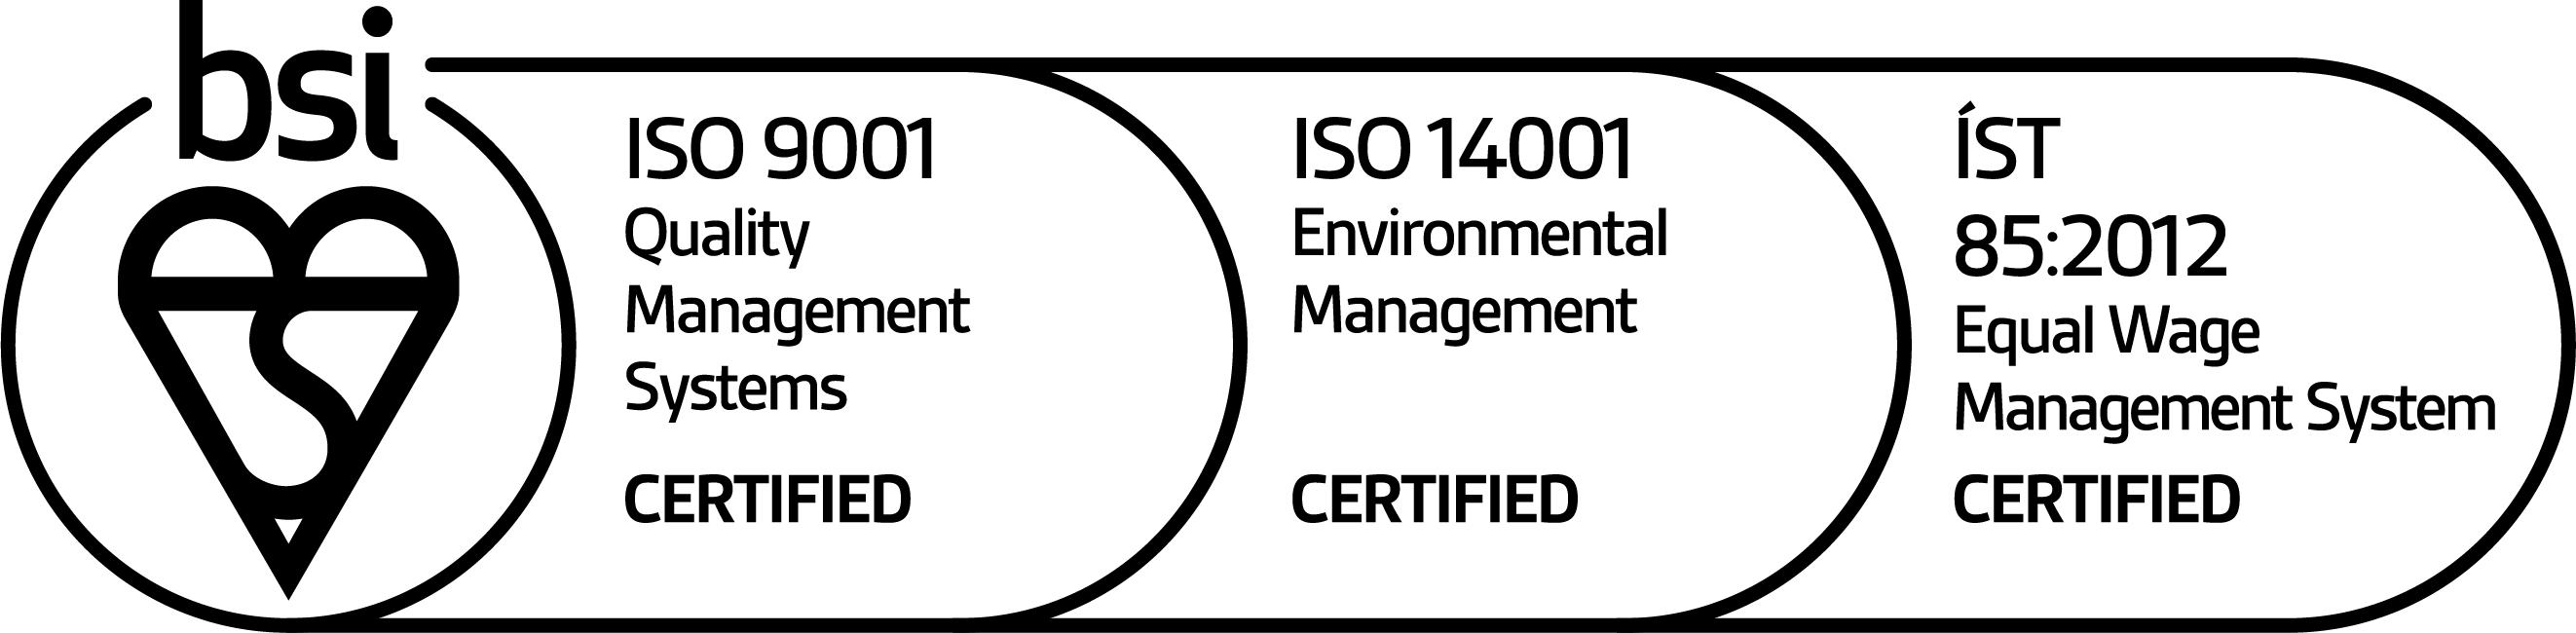 Logo that says bsi ISO 9001 Quality Management Systems CERTIFIED; ISO 14001 Environmental Management CERTIFIED; ÍST 85:2012 Equal Wage Management System CERTIFIED